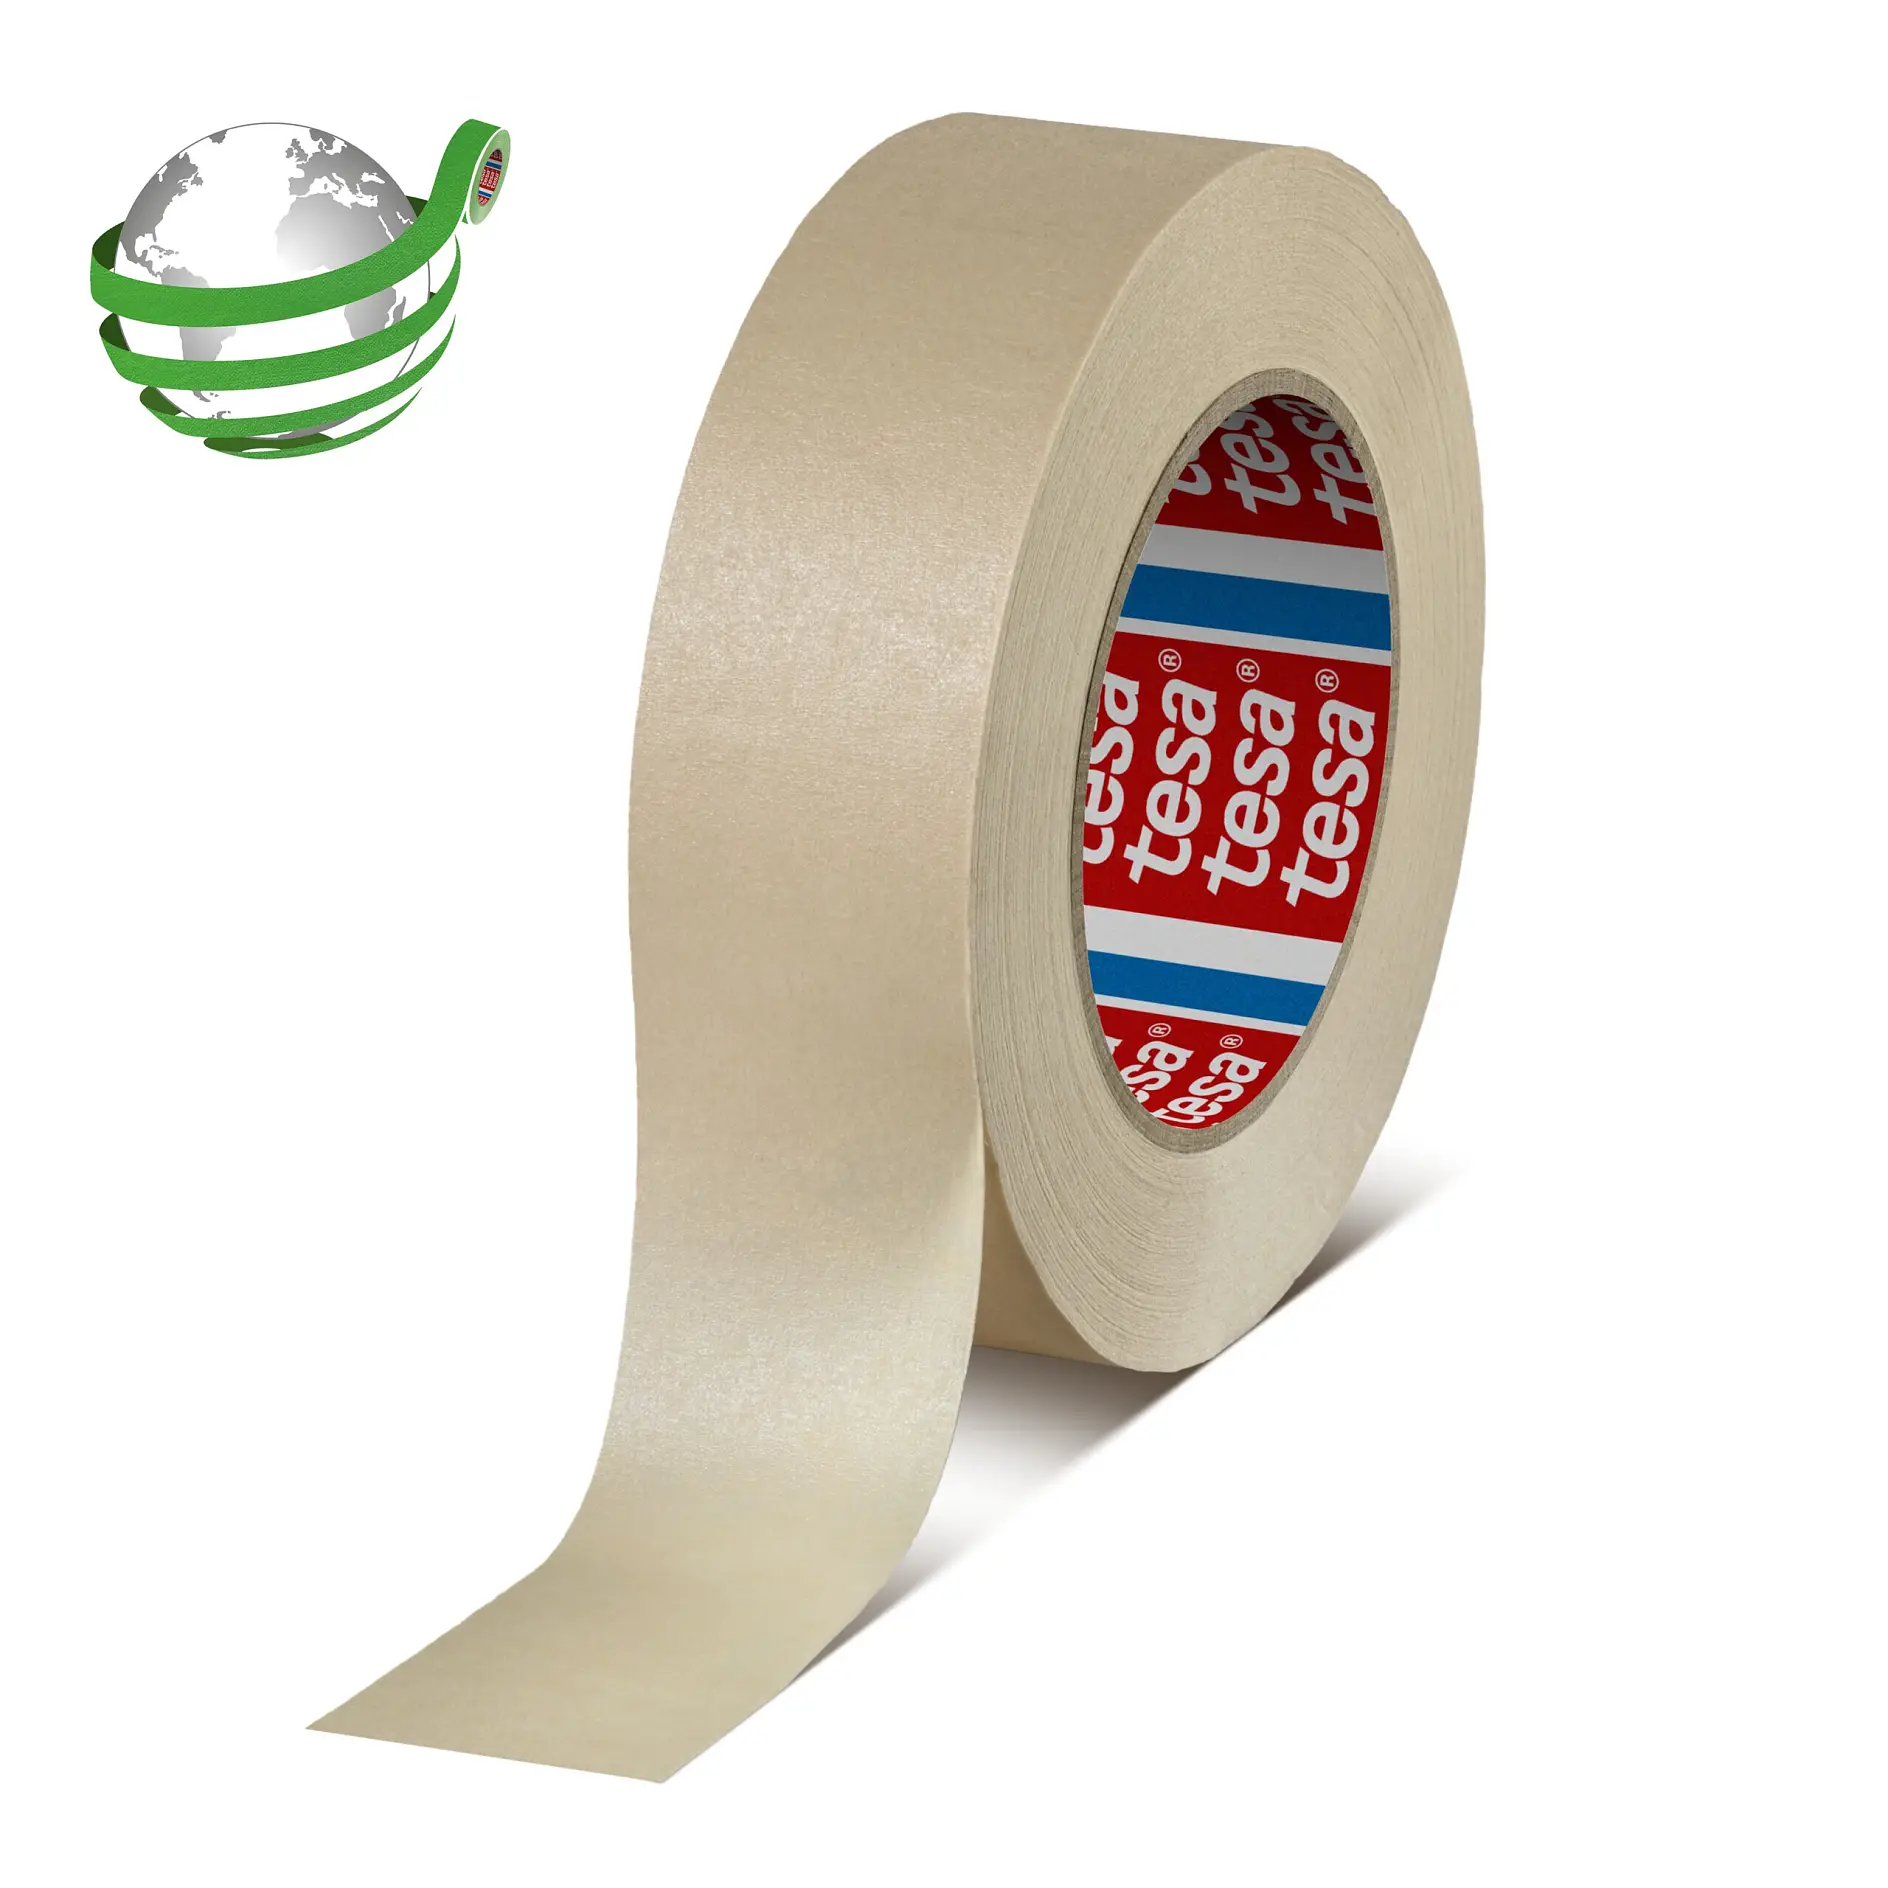 tesa-4302-high-performance-paper-masking-tape-up-to-160-°C-chamois-043020000300-with-marker